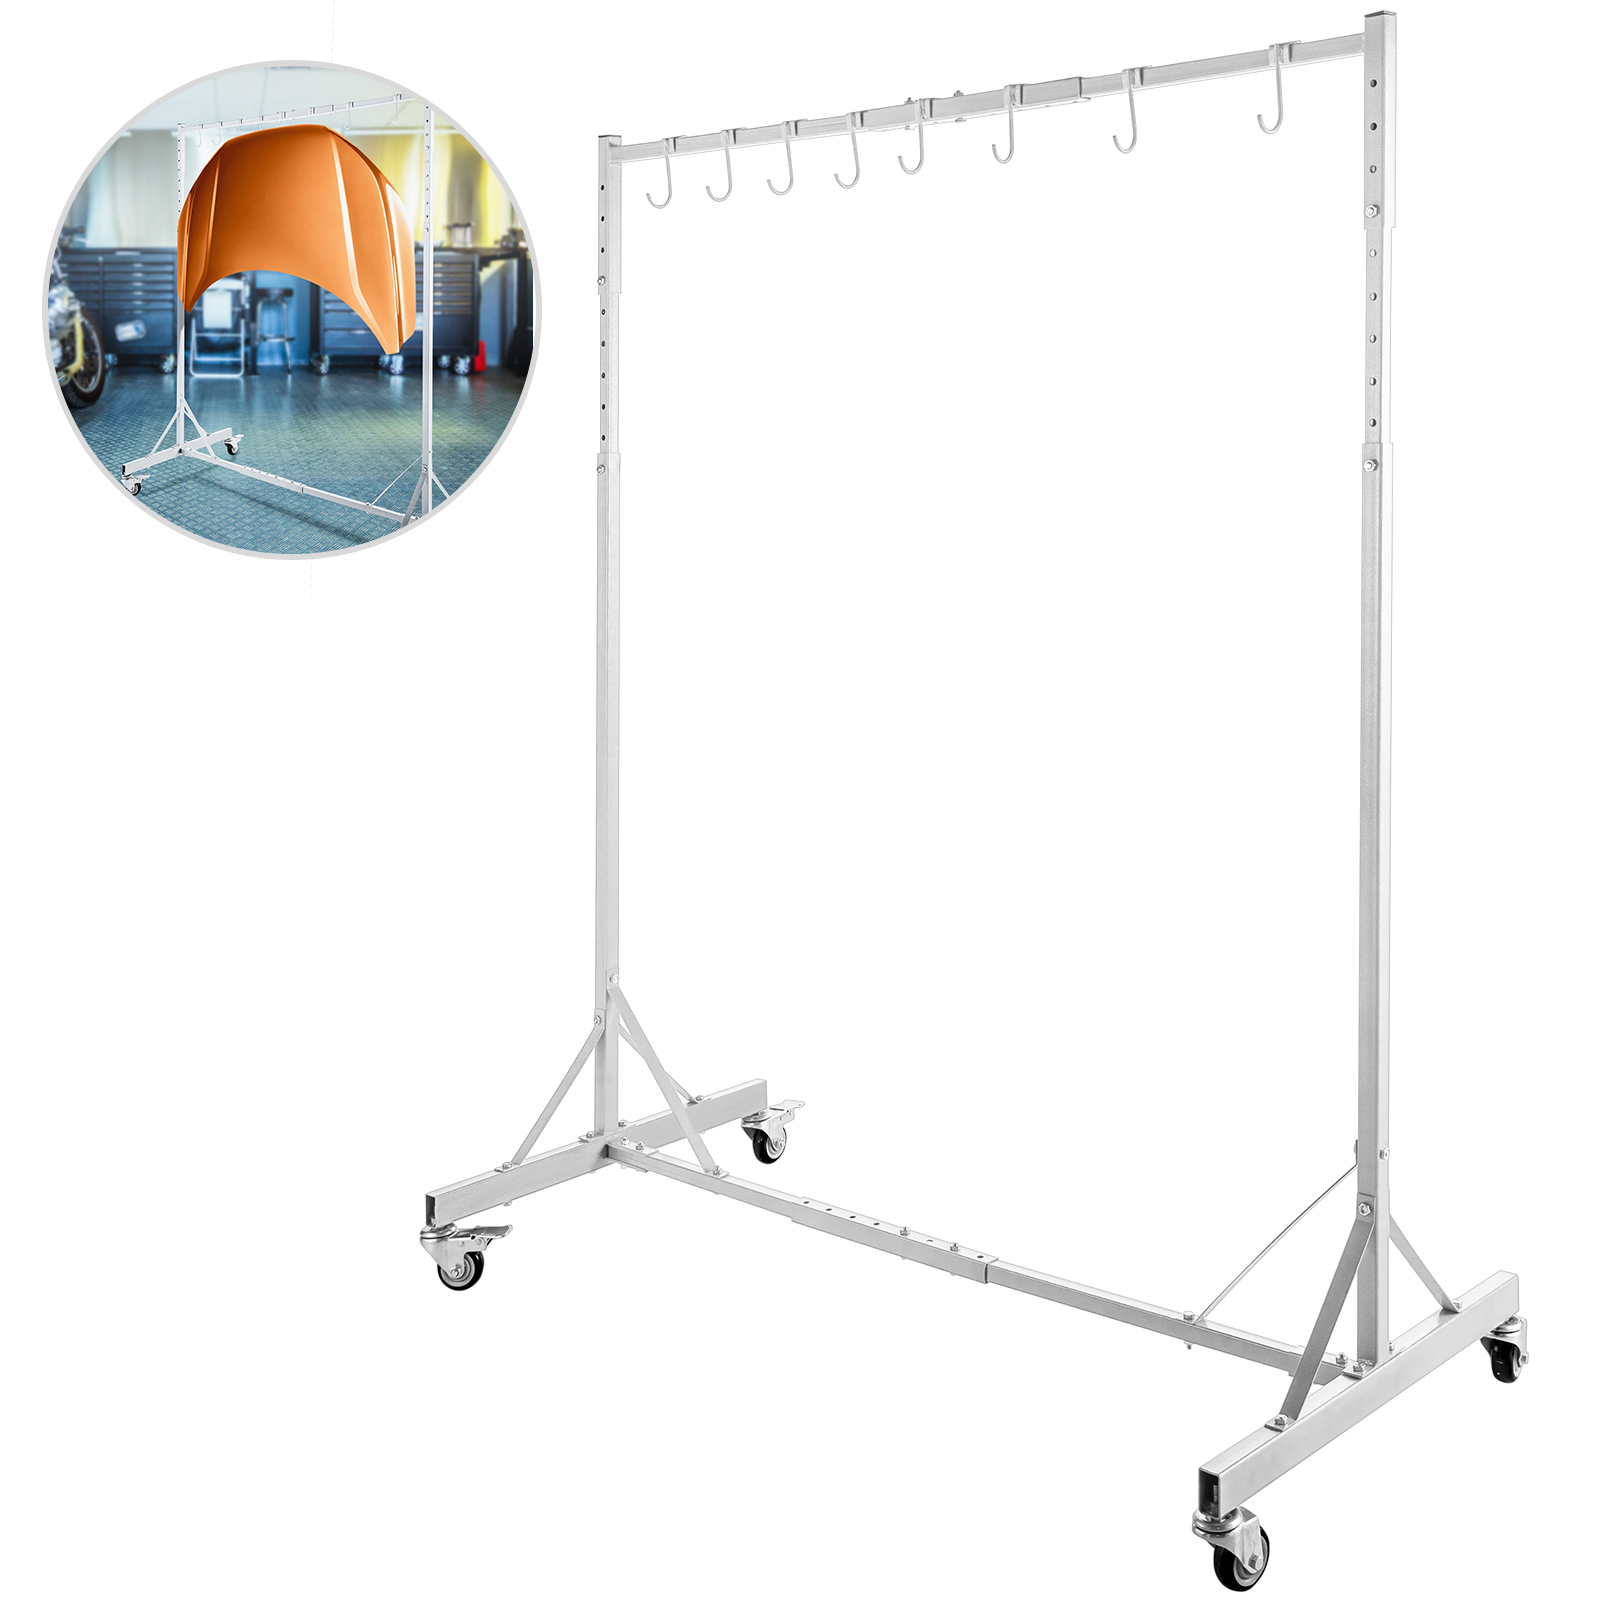 VEVOR Automotive Spray Painting Rack Stand, Auto Body Shop Paint Booth Hood Parts